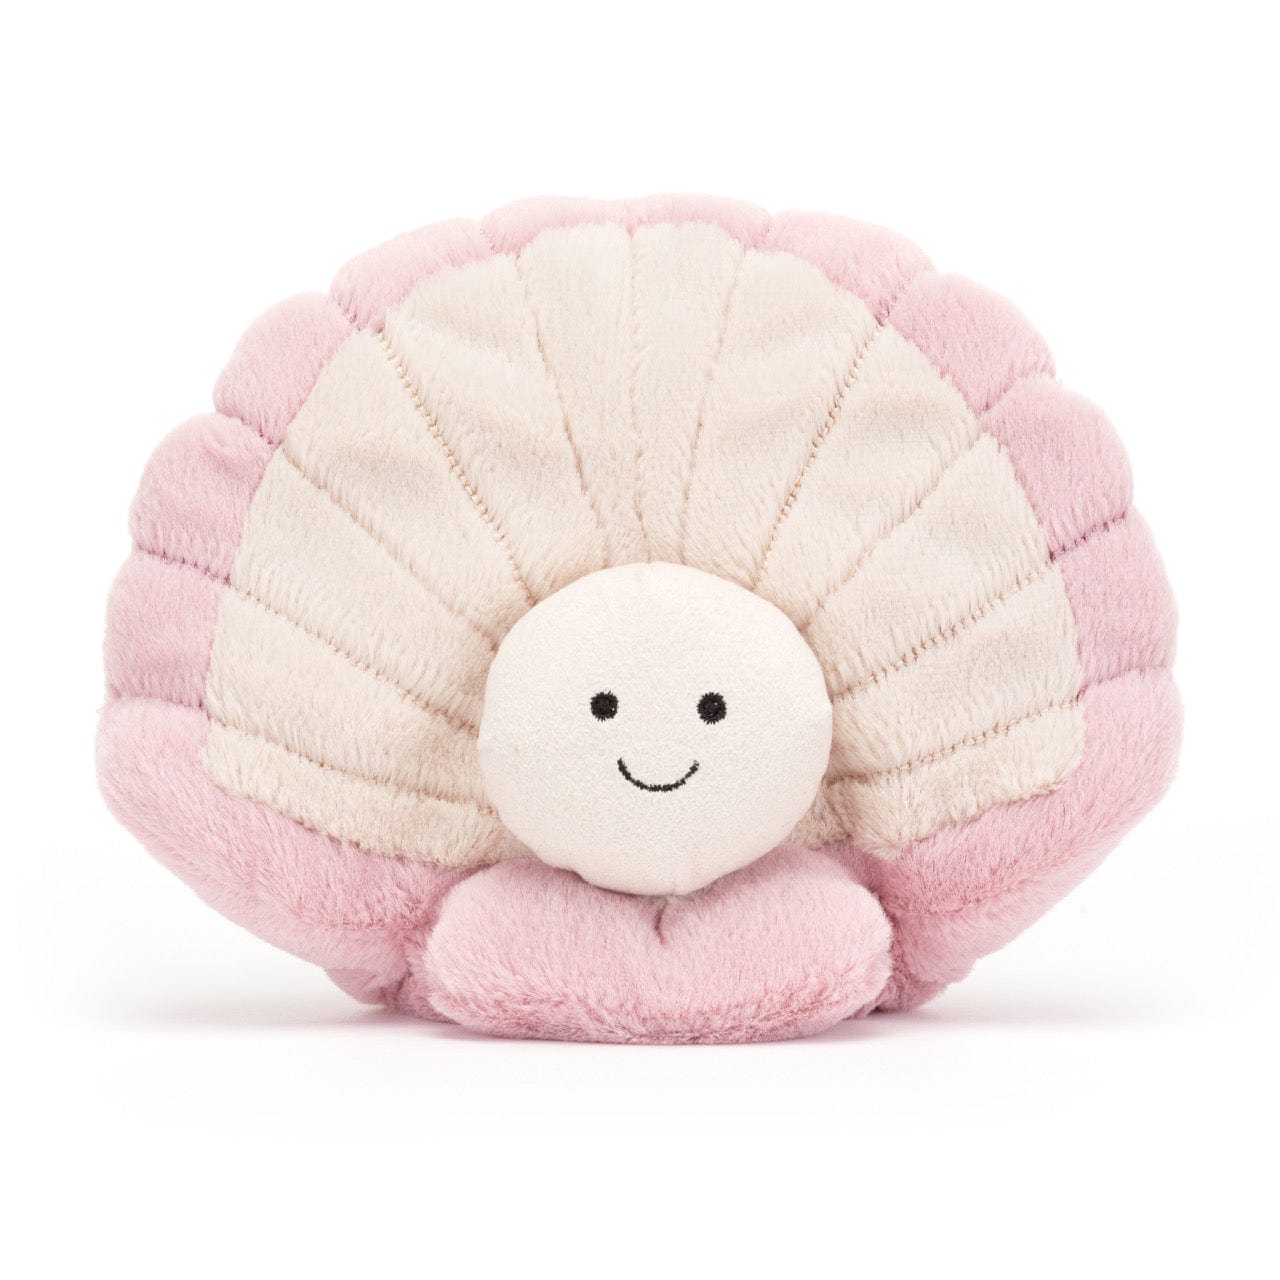 Clemmie Clam JellyCat Lil Tulips